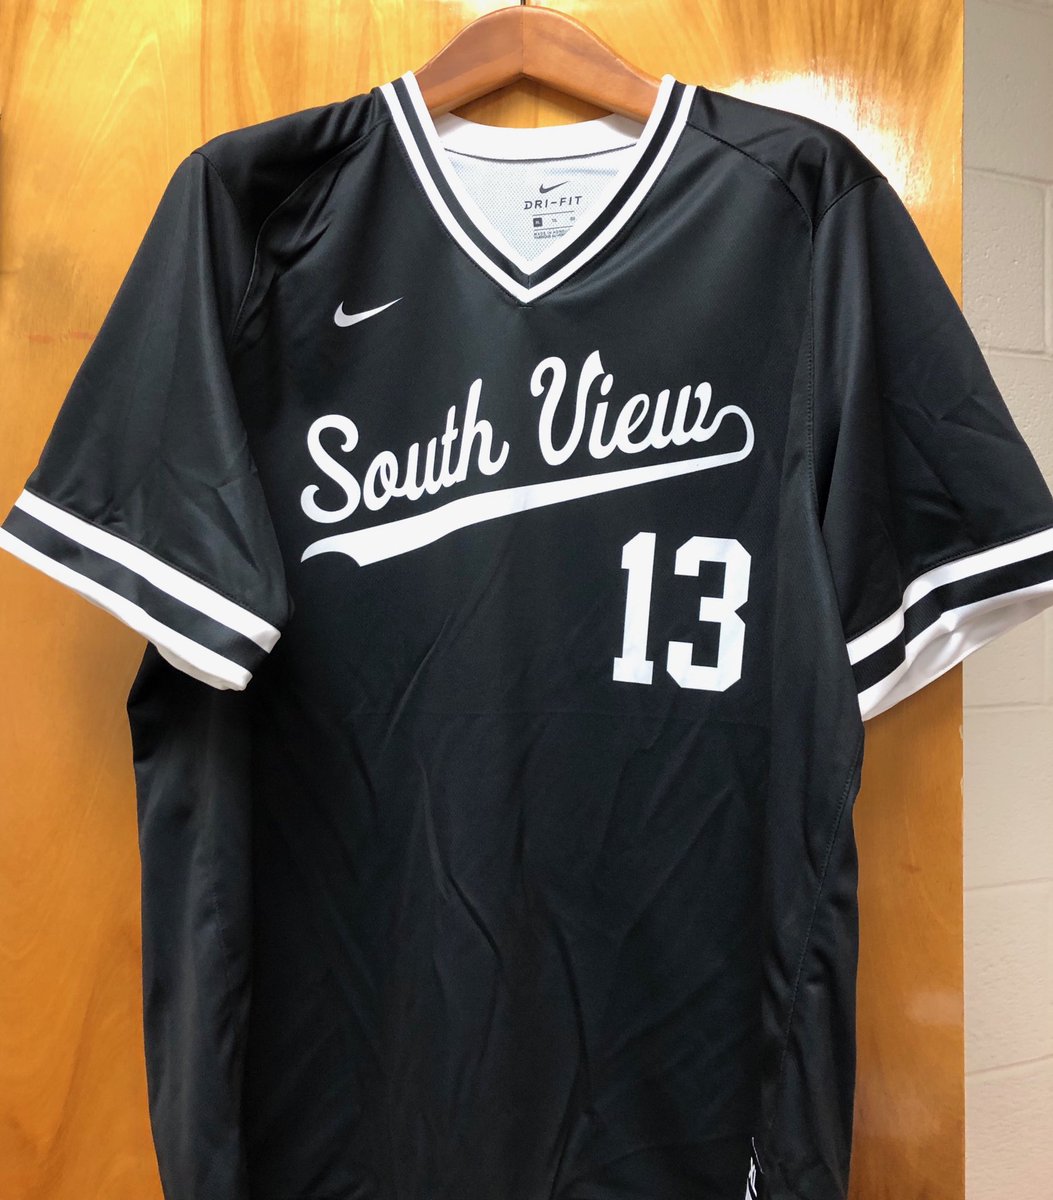 K-Foot on X: New Nike Baseball Jerseys in at South View High School! The V- Neck Throwbacks! ⁦@southviewsports⁩ ⁦@fungohitter8⁩   / X